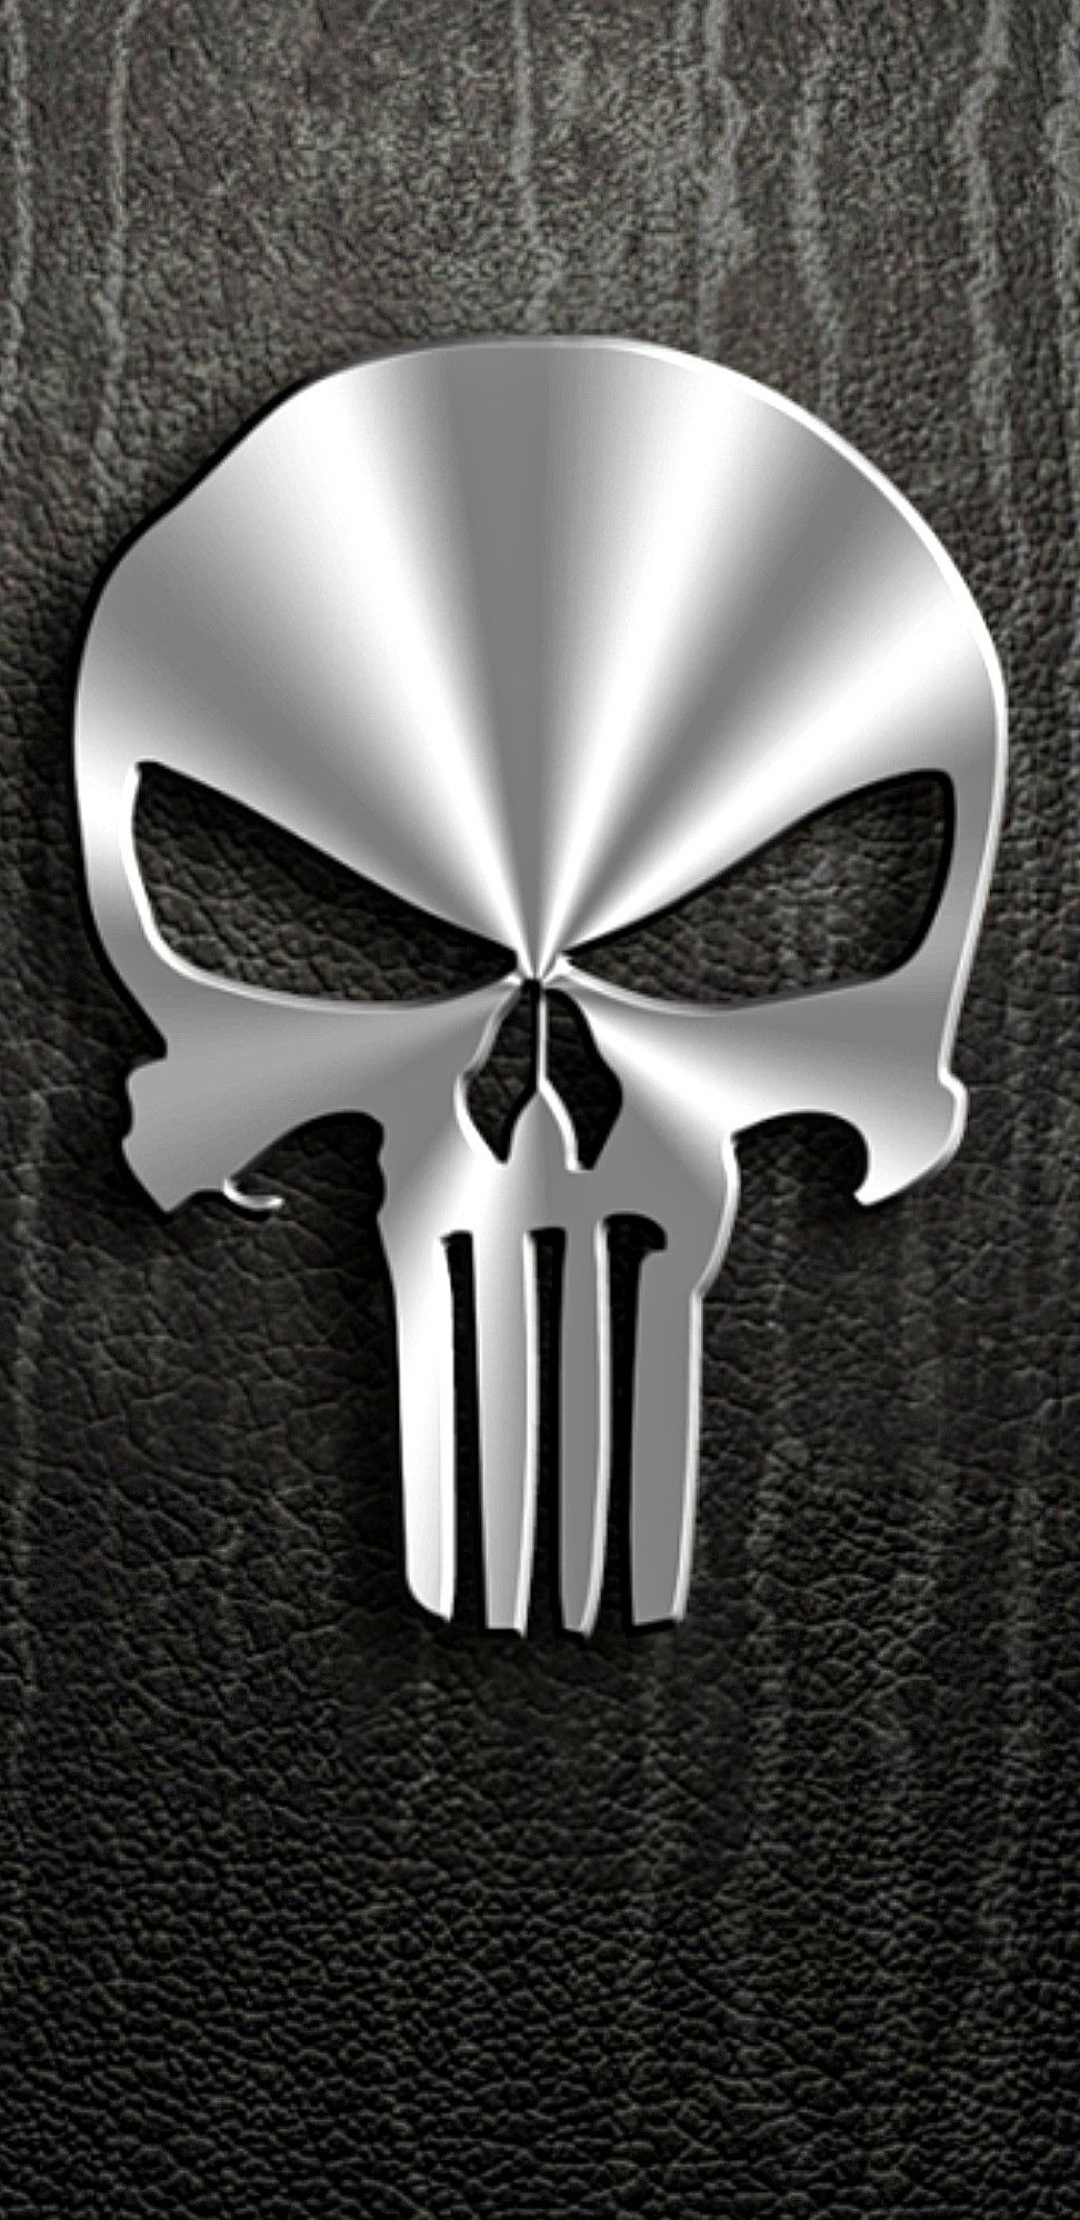 1080x2220 Pin by Chapolin on Her&Atilde;&sup3;is | Punisher logo, Punisher, Skull wallpaper